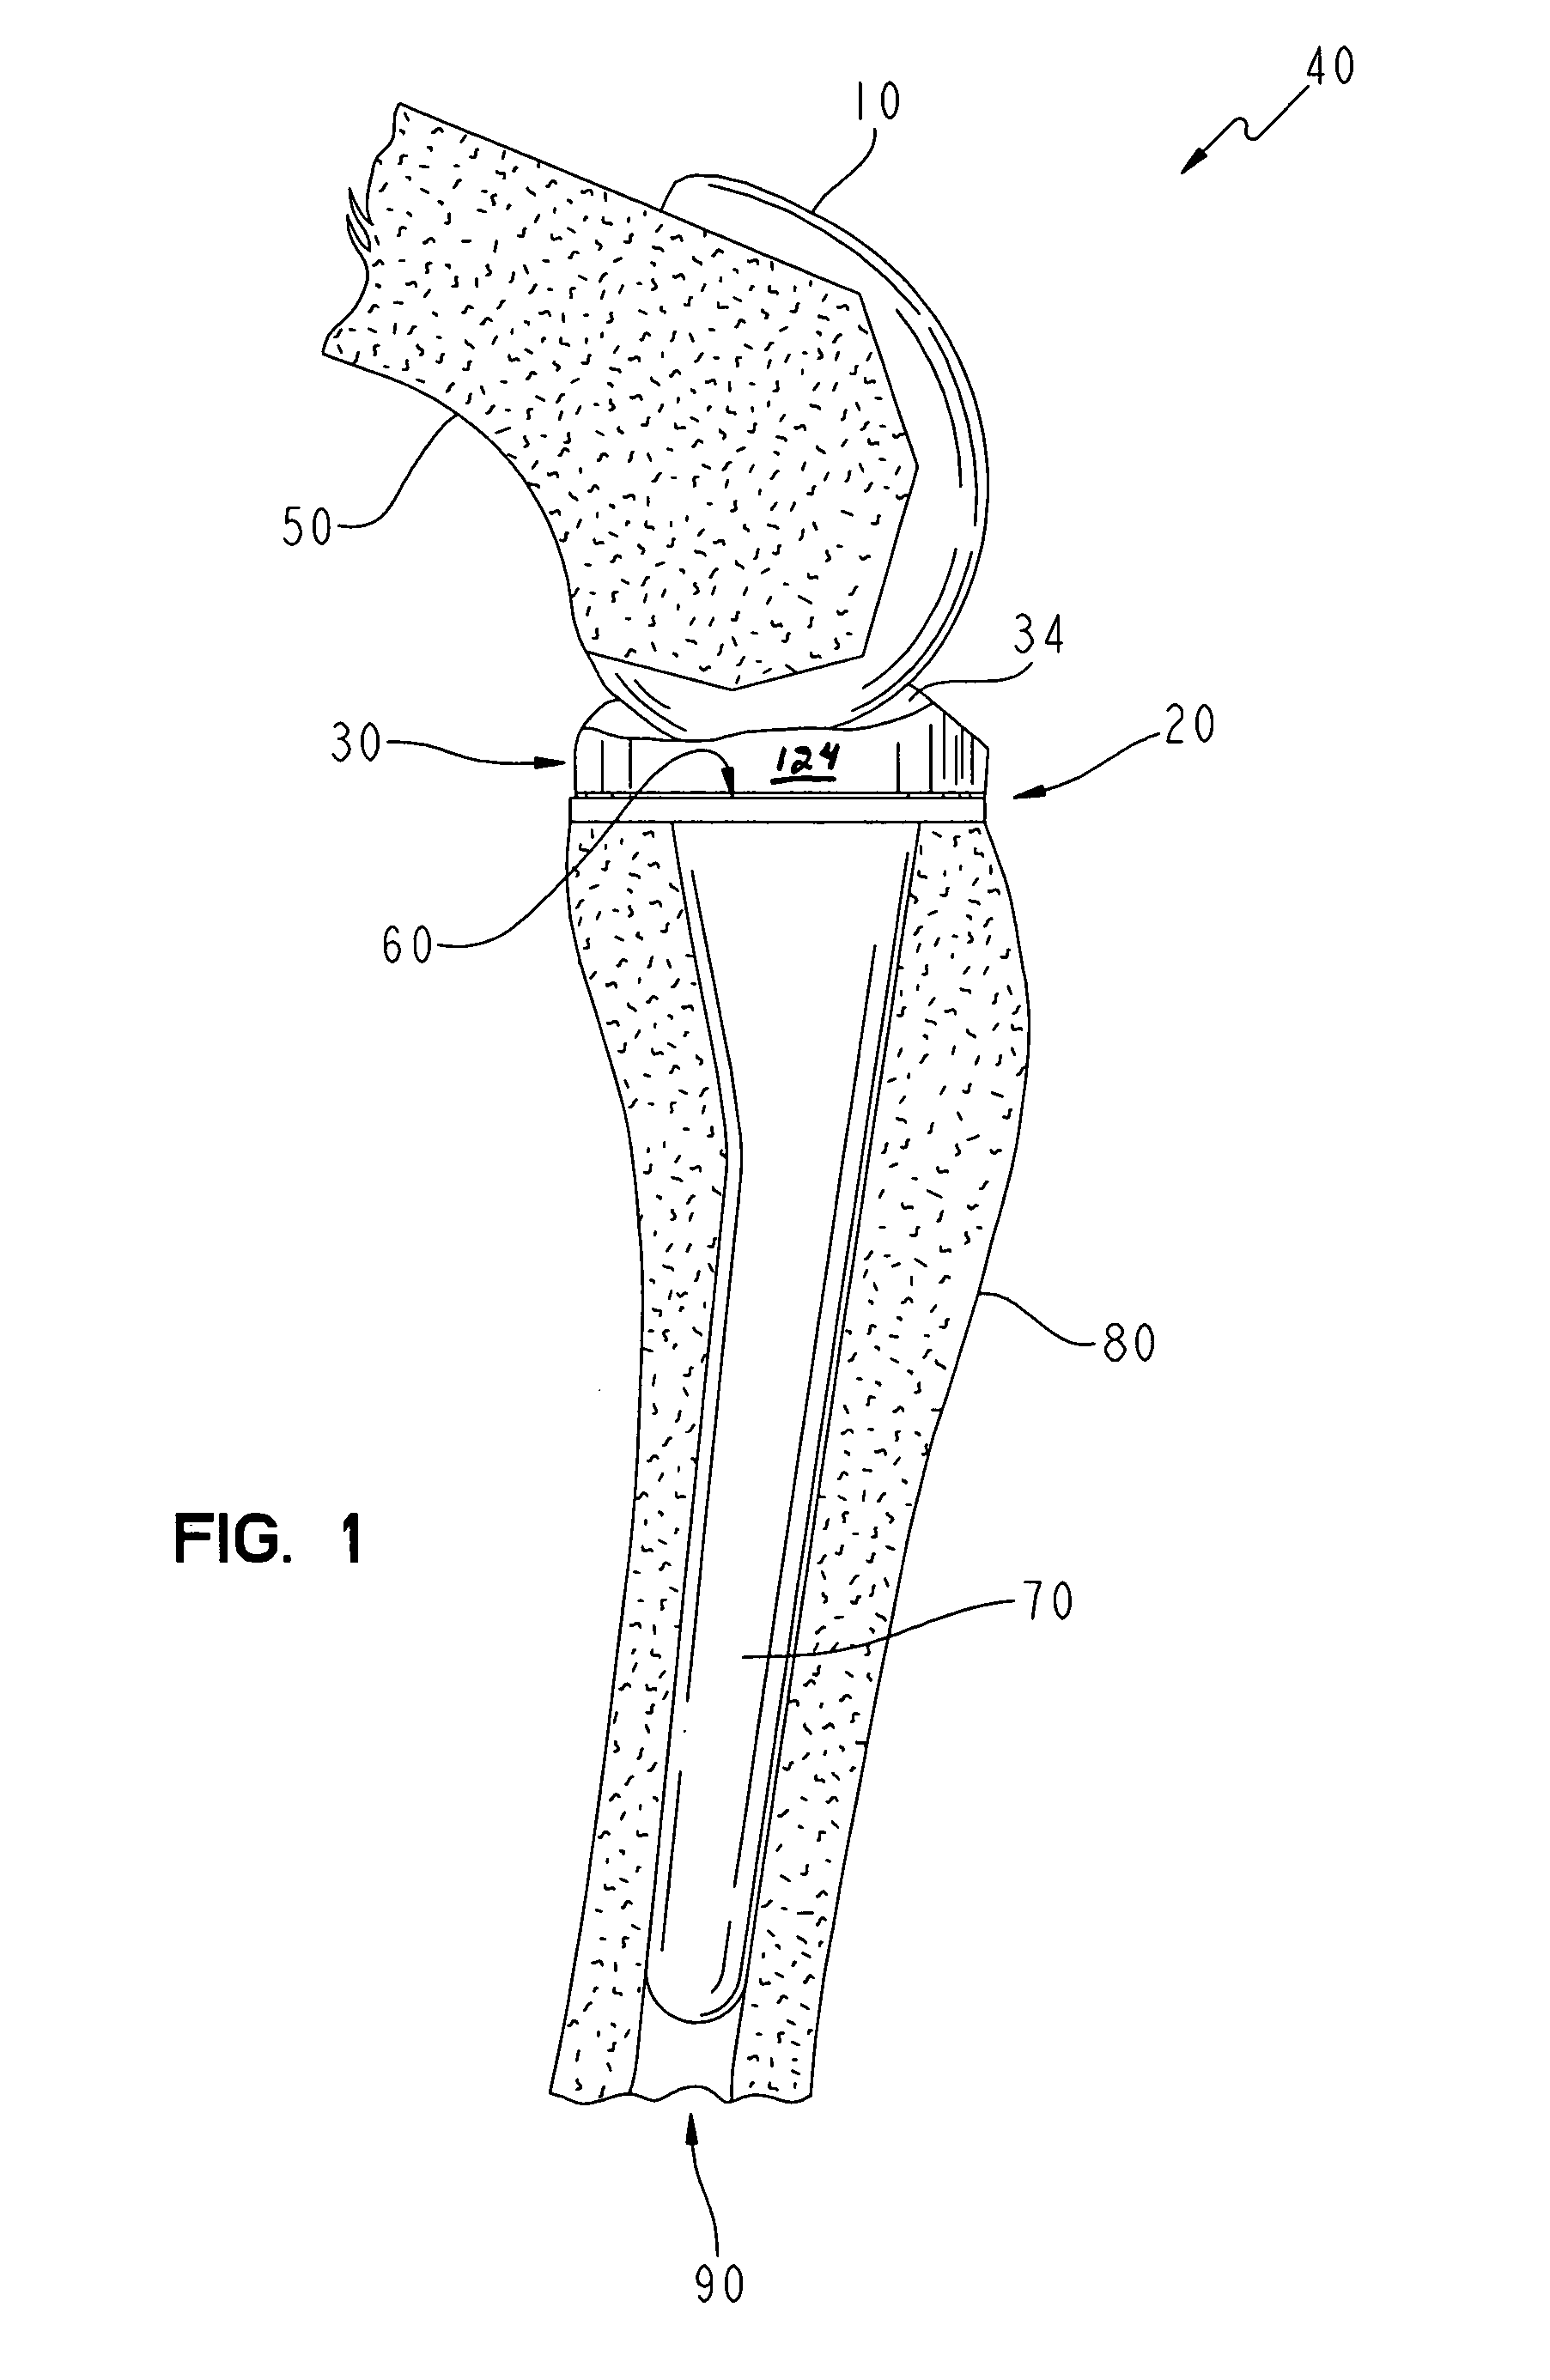 Modular implant with a micro-motion damper